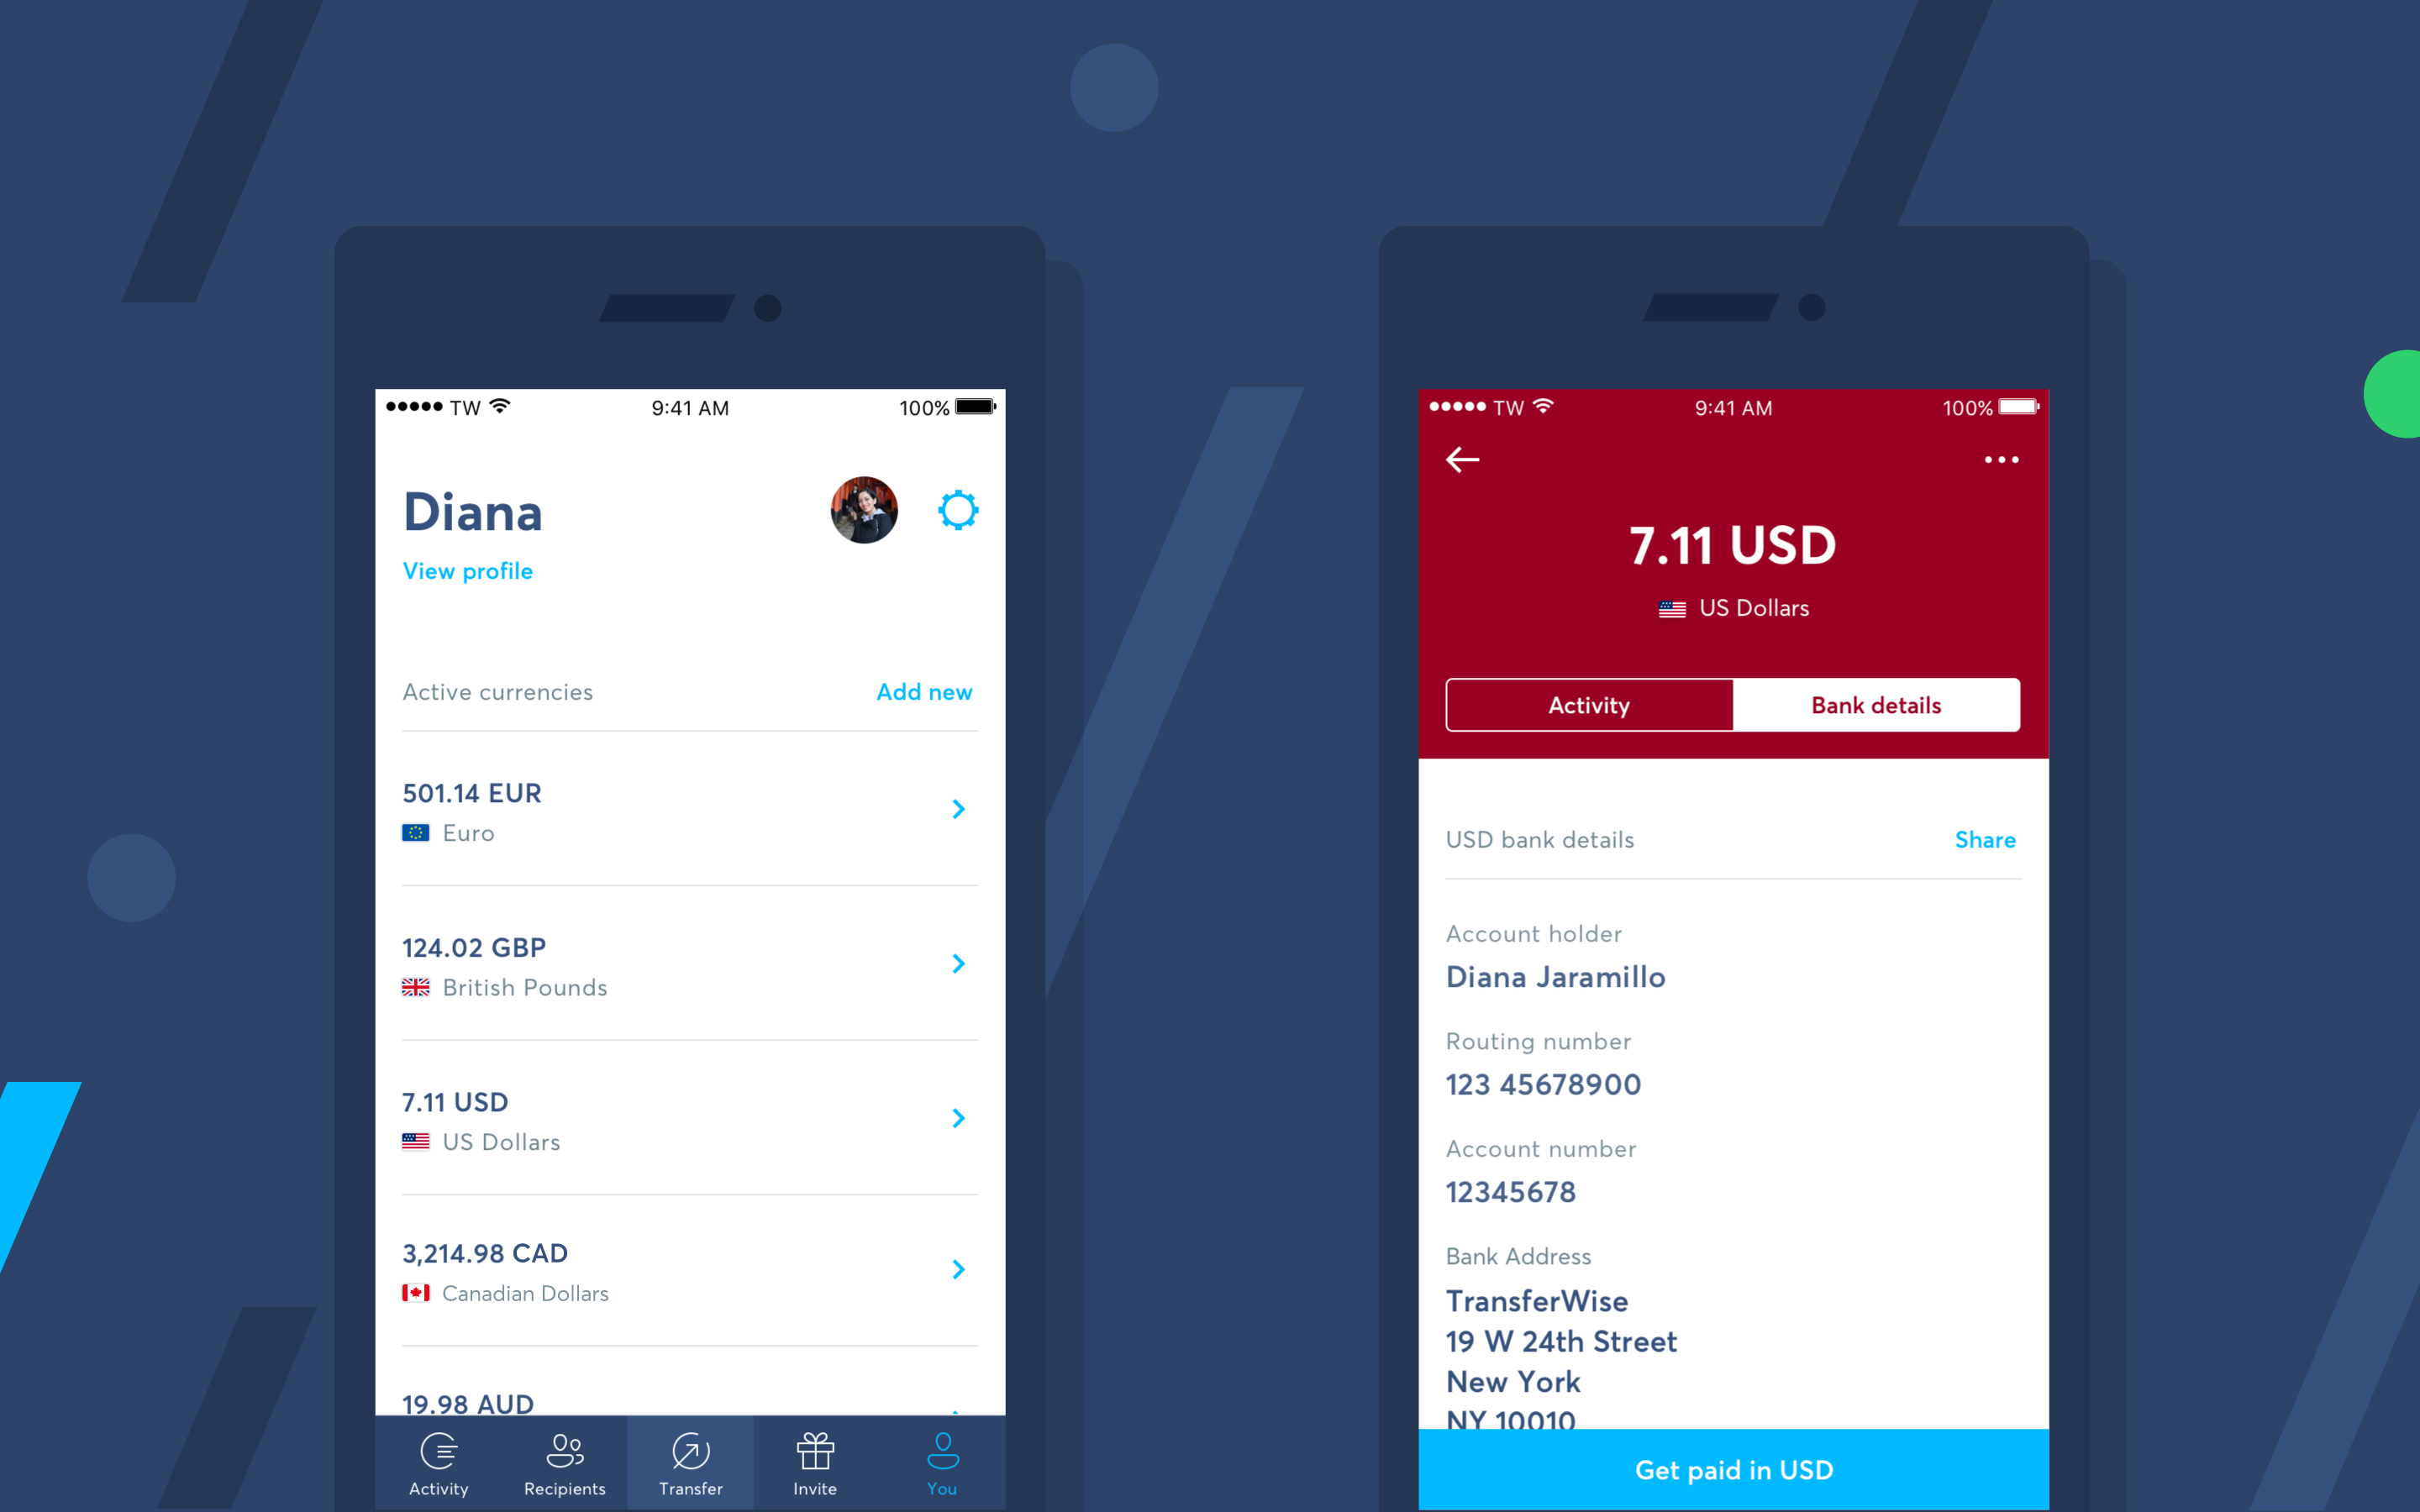 An image showing the TransferWise Borderless account interface on mobile